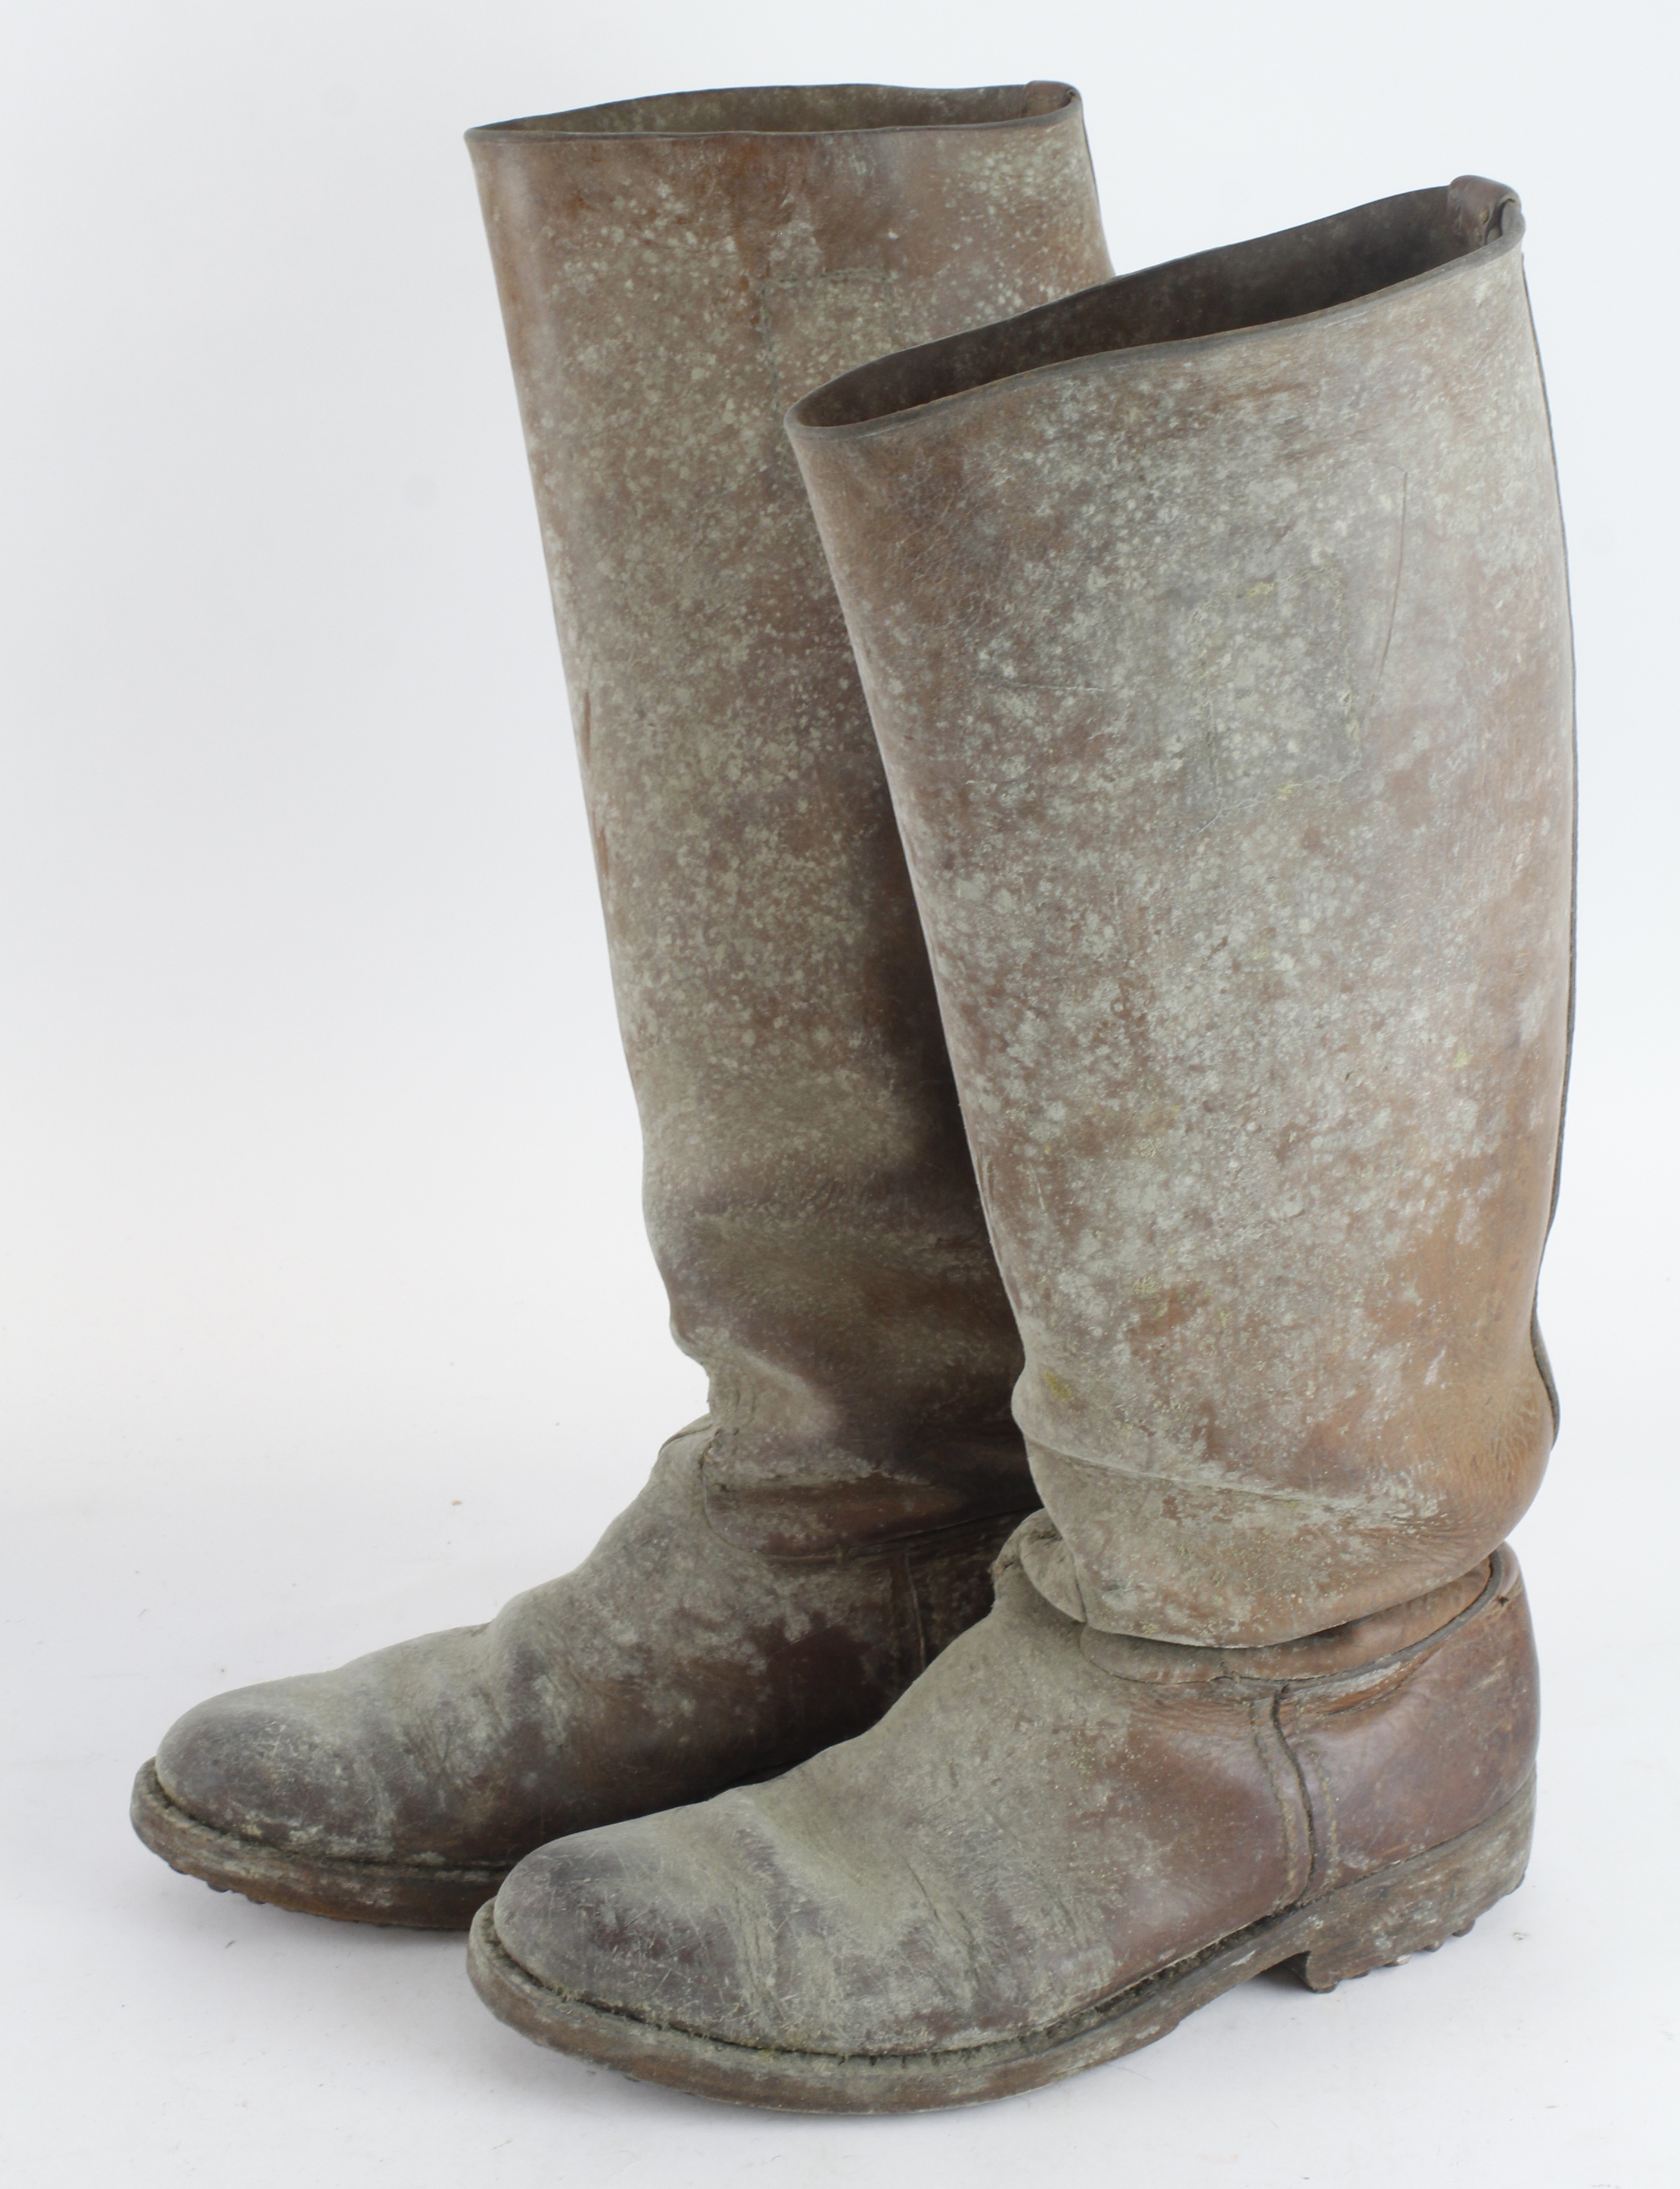 German WW1 brown leather officers field boots.